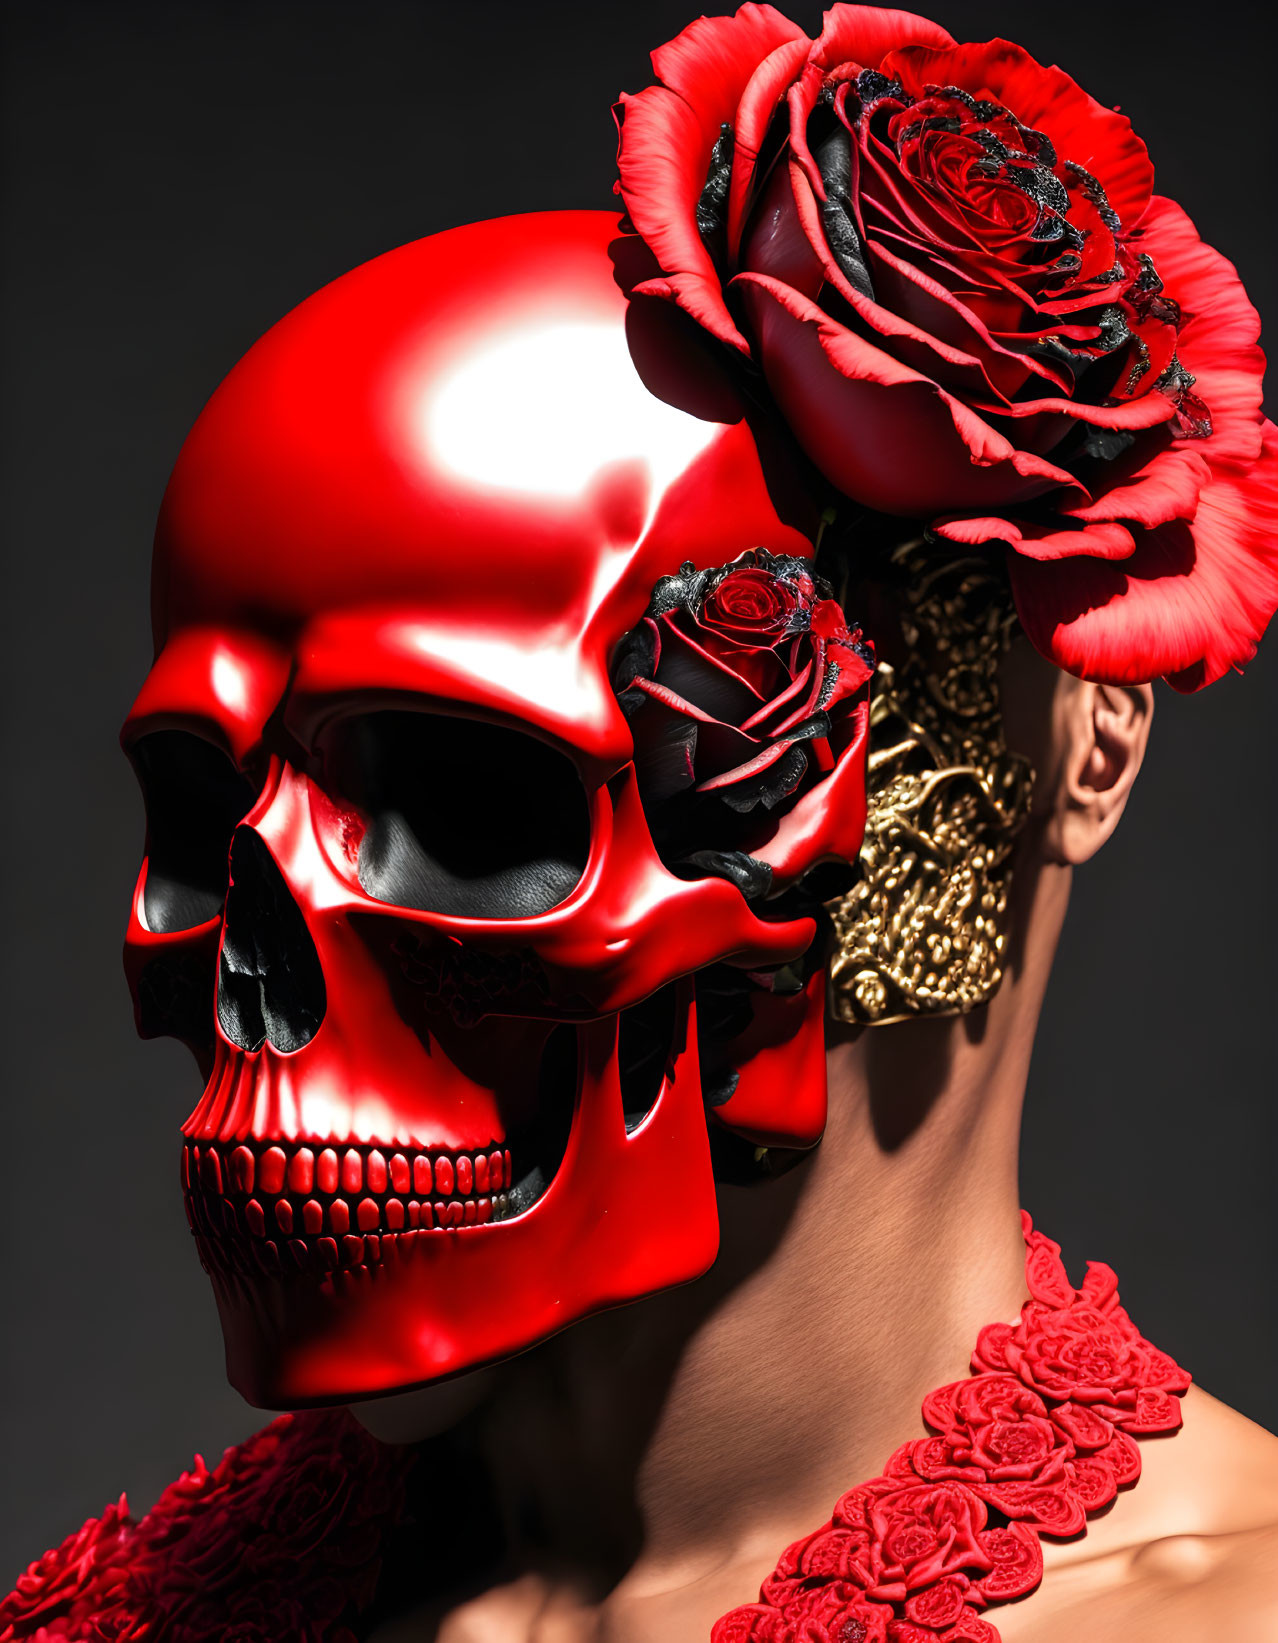 Red Skull Mask with Roses and Gold Detailing on Dark Background